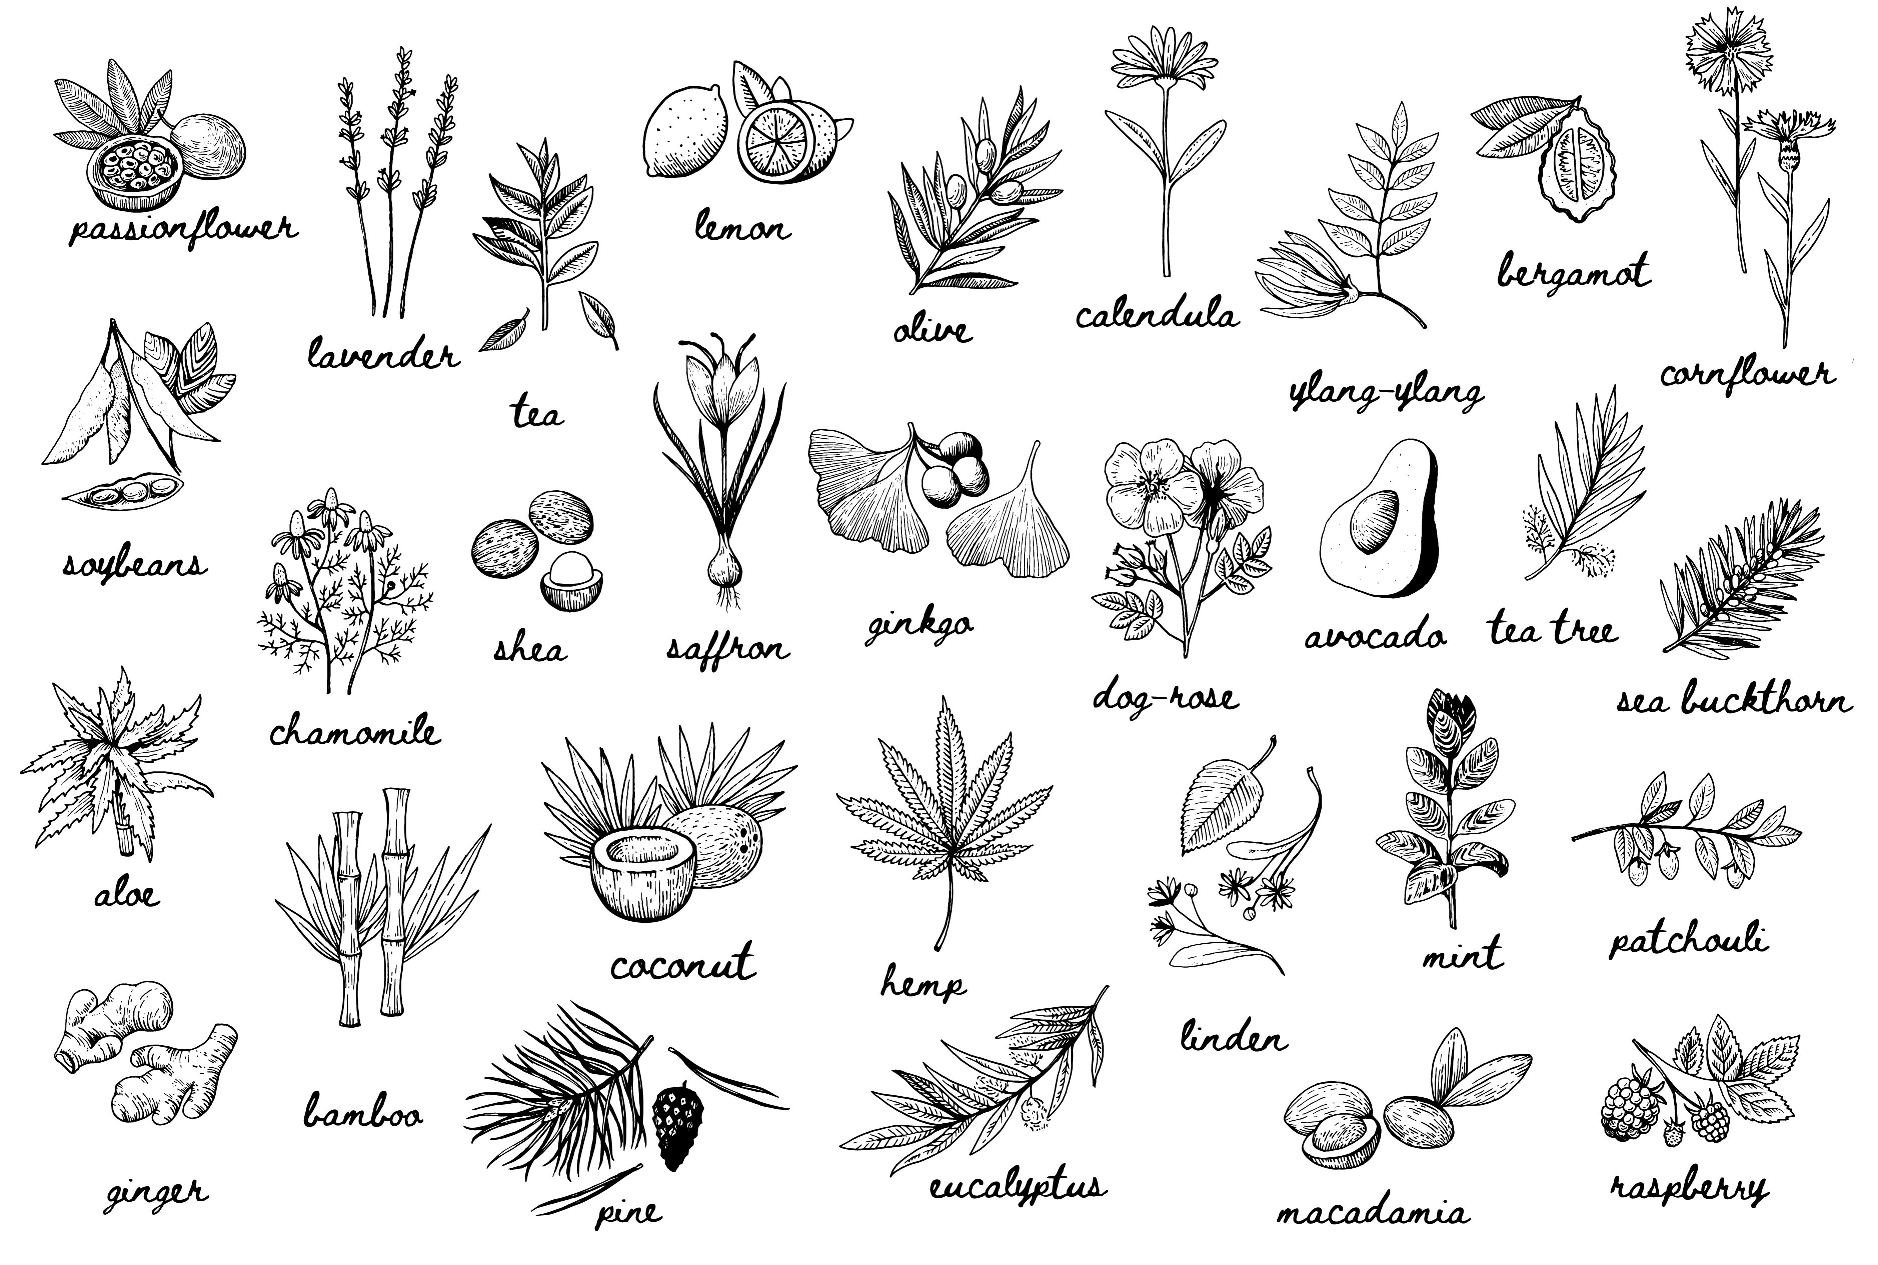 Black and white drawing of different types of plants.